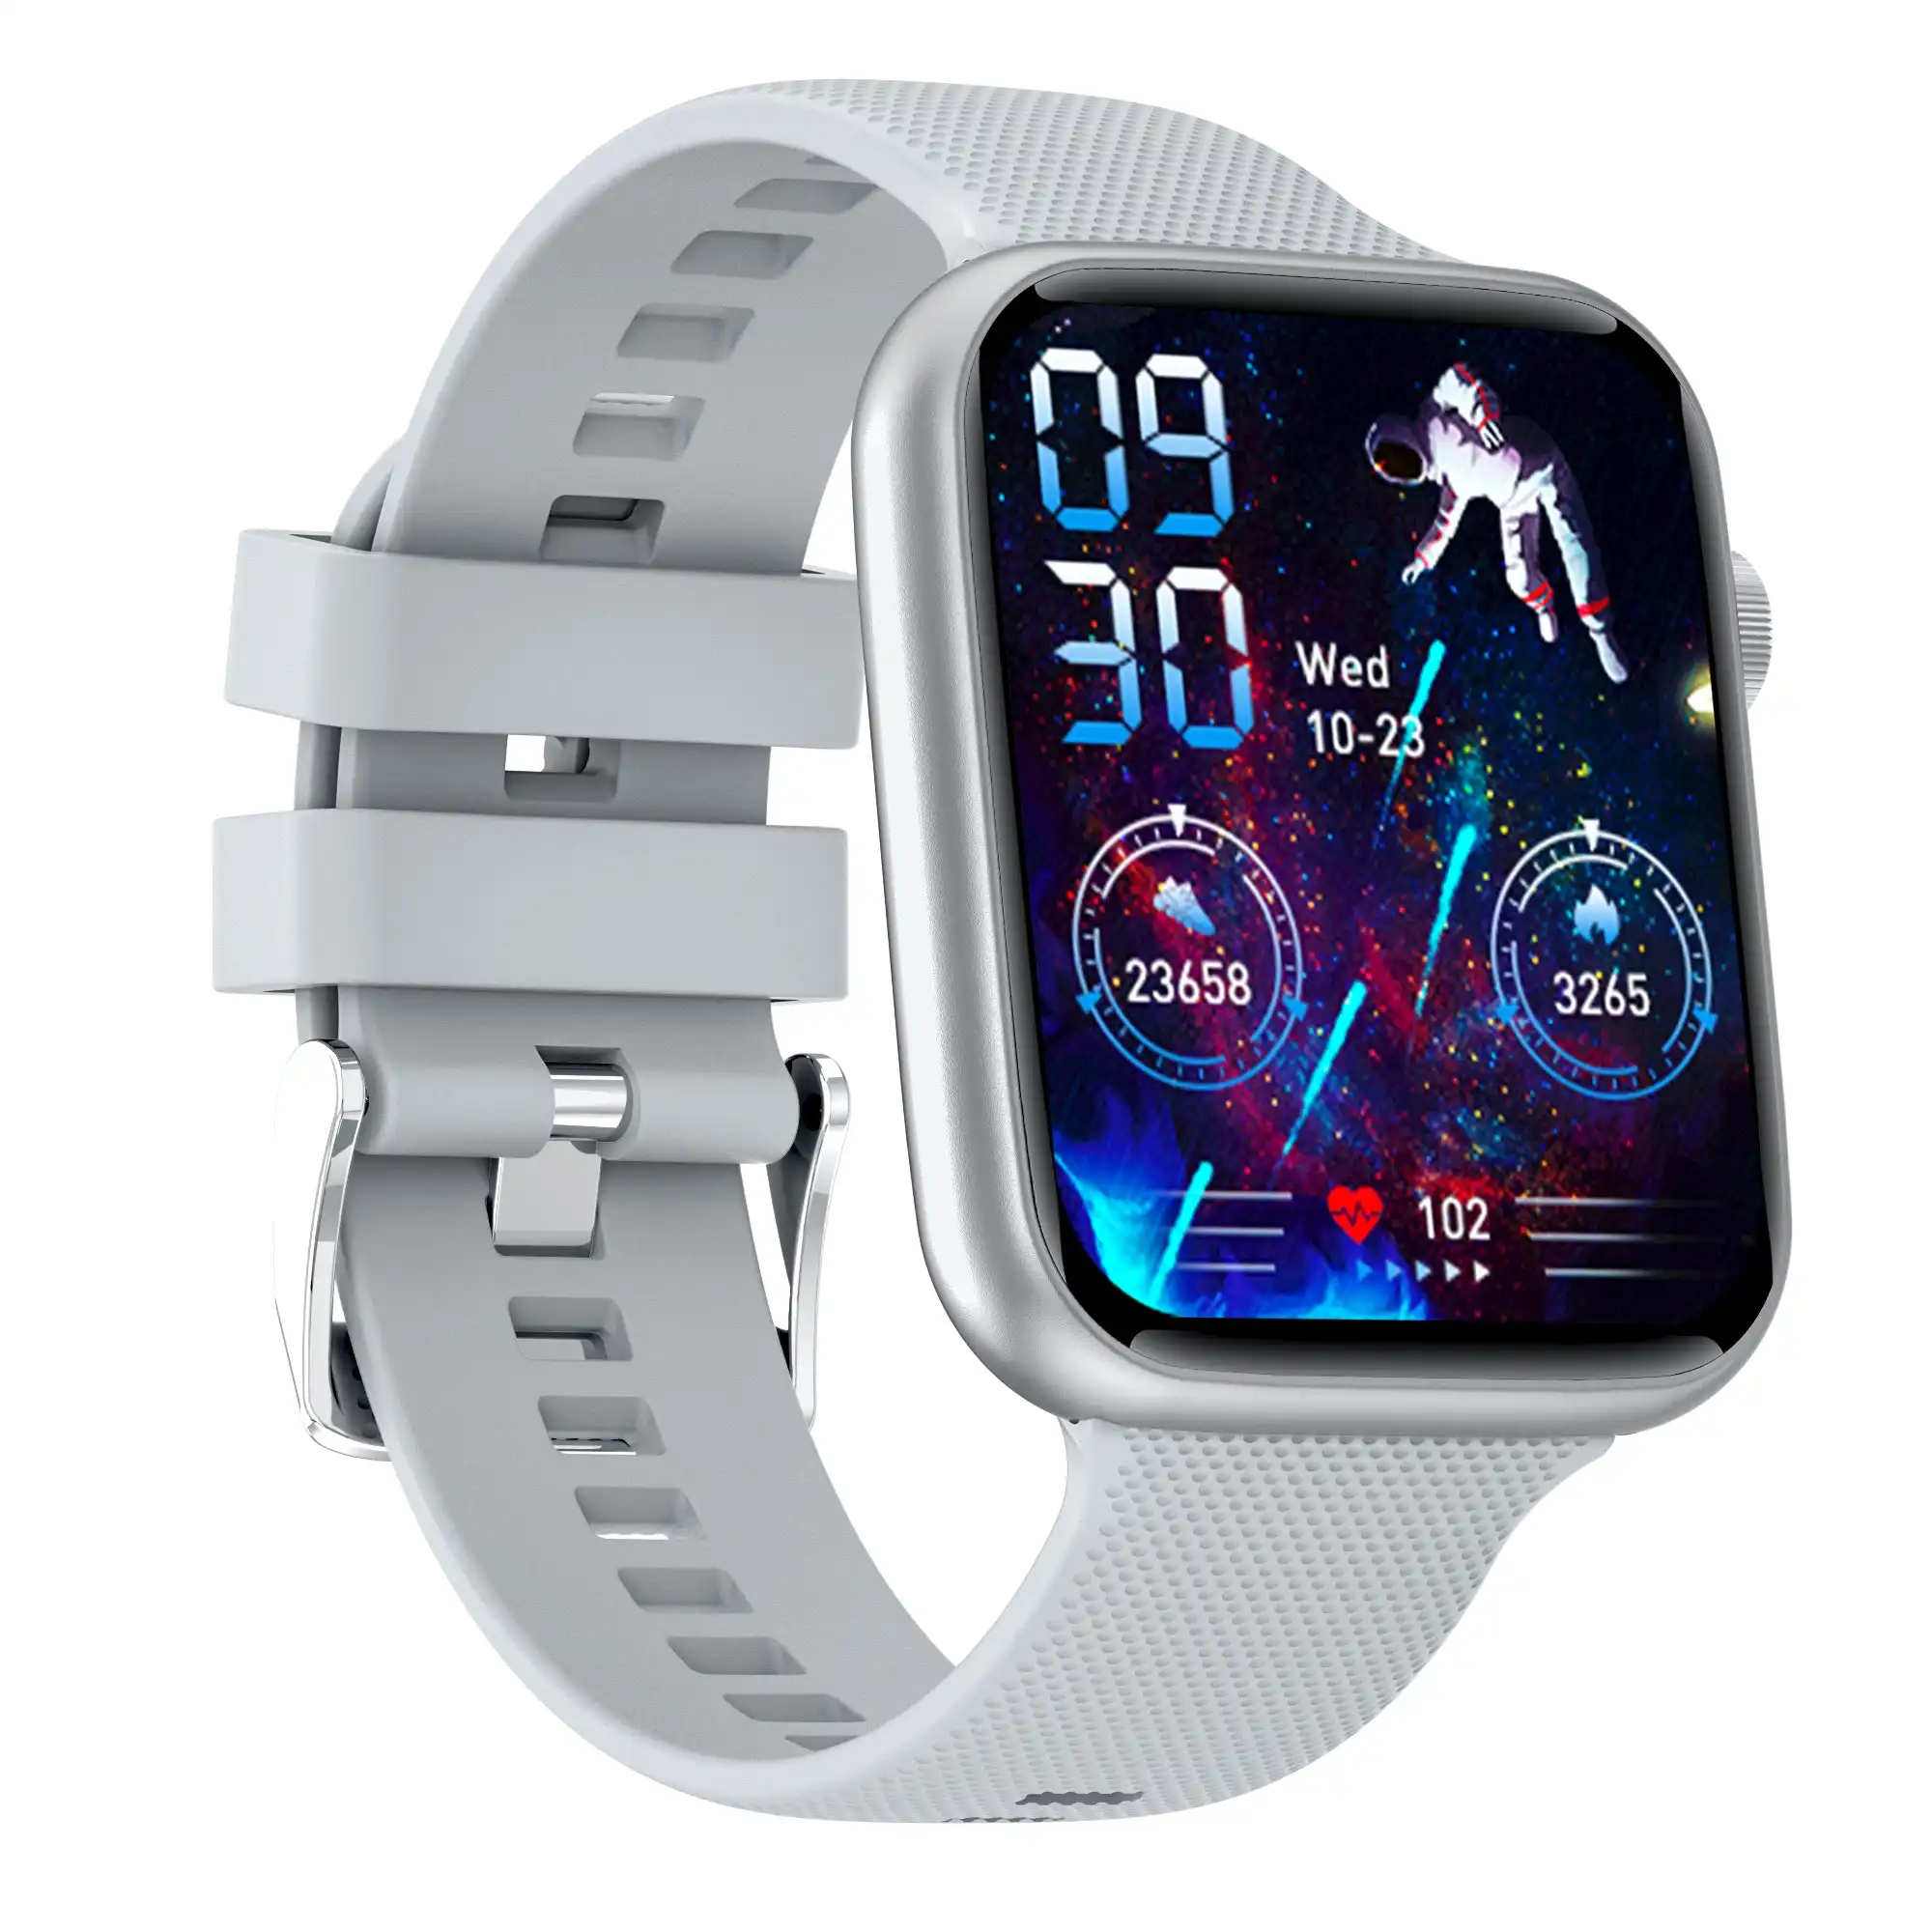 Bluetooth Smart Watch 1.85" IPS FHD Touch Screen Monitor Heart Rate Blood Pressure BT 5.0 - Silver